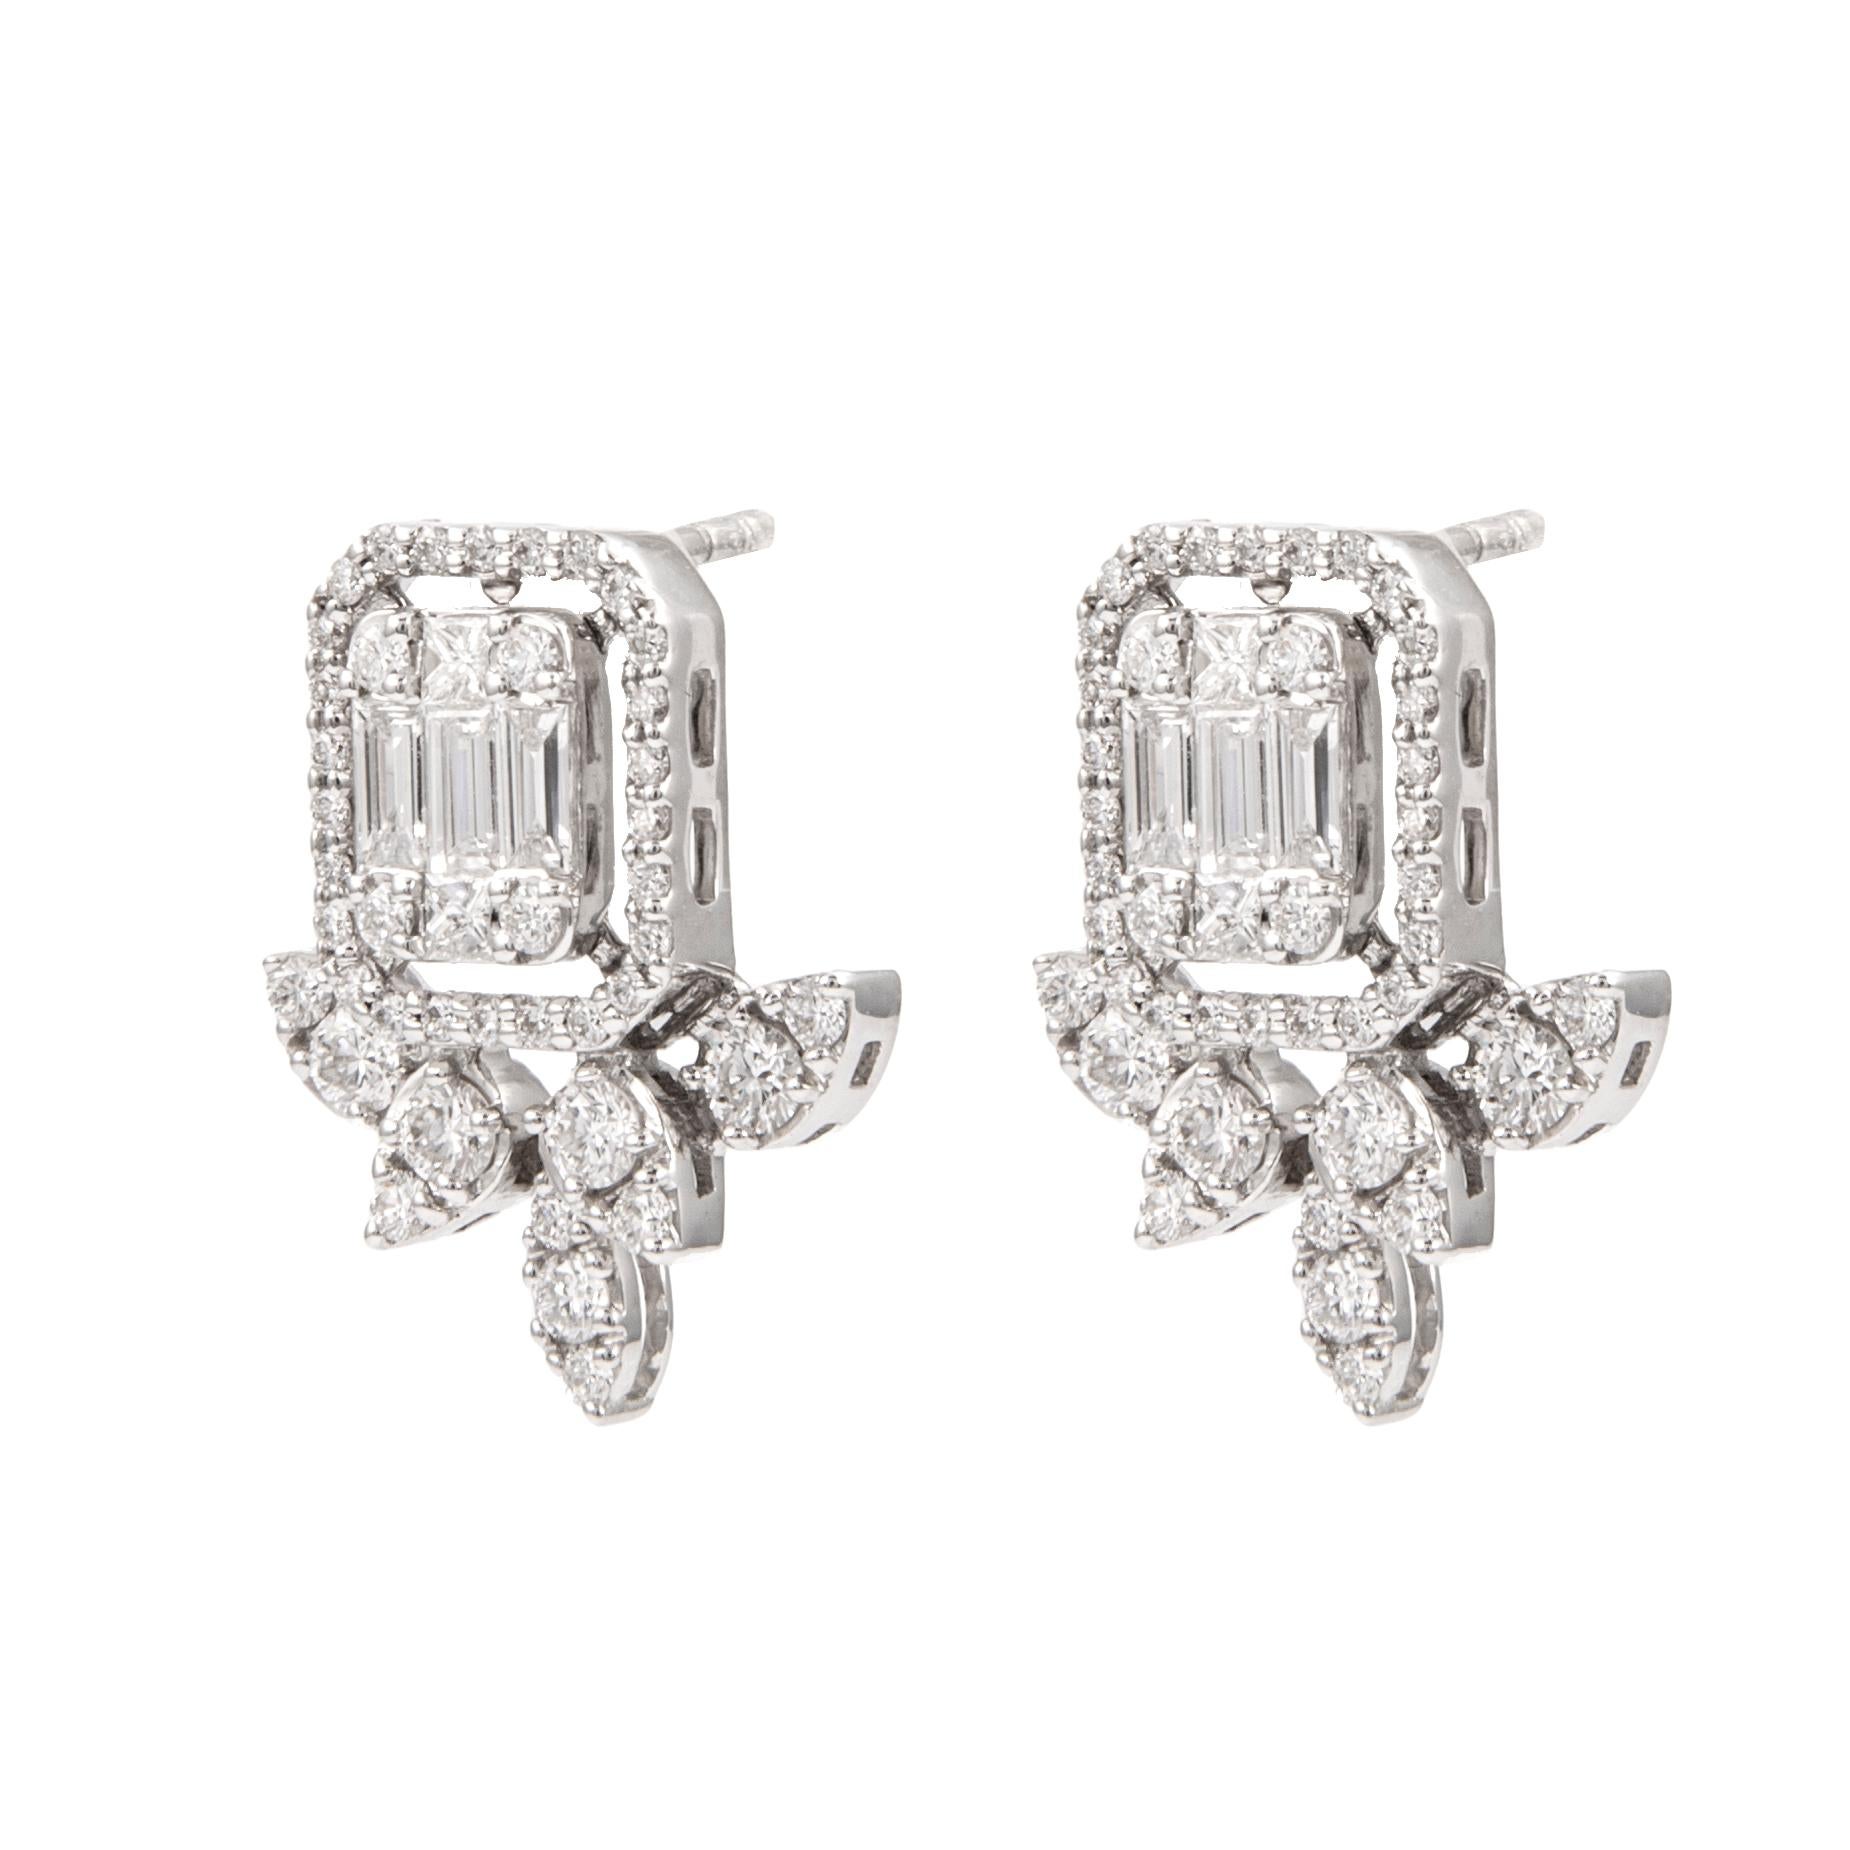 Baguette Cut Alexander 1.23ct Illusion Set Diamond Stud Earrings with Halo 18k White Gold